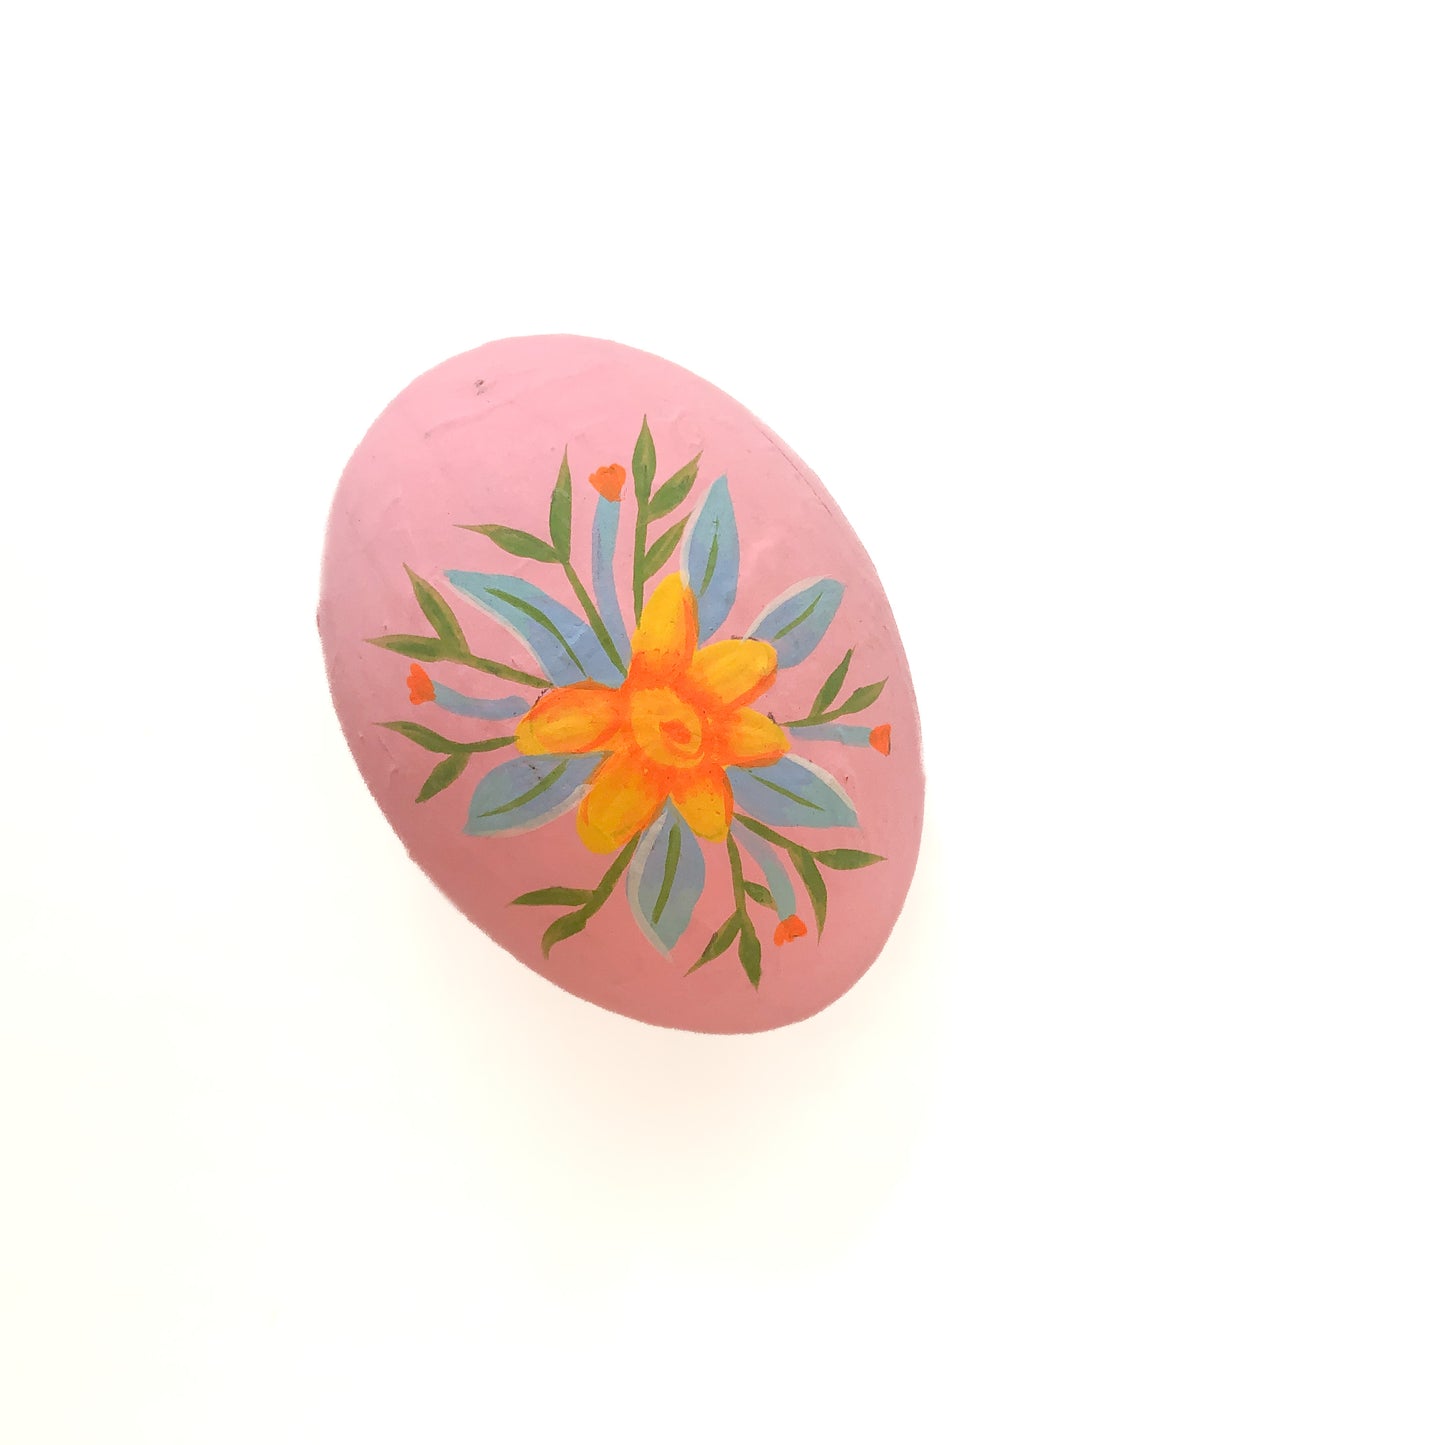 3" Hand Painted Papermache Floral Egg